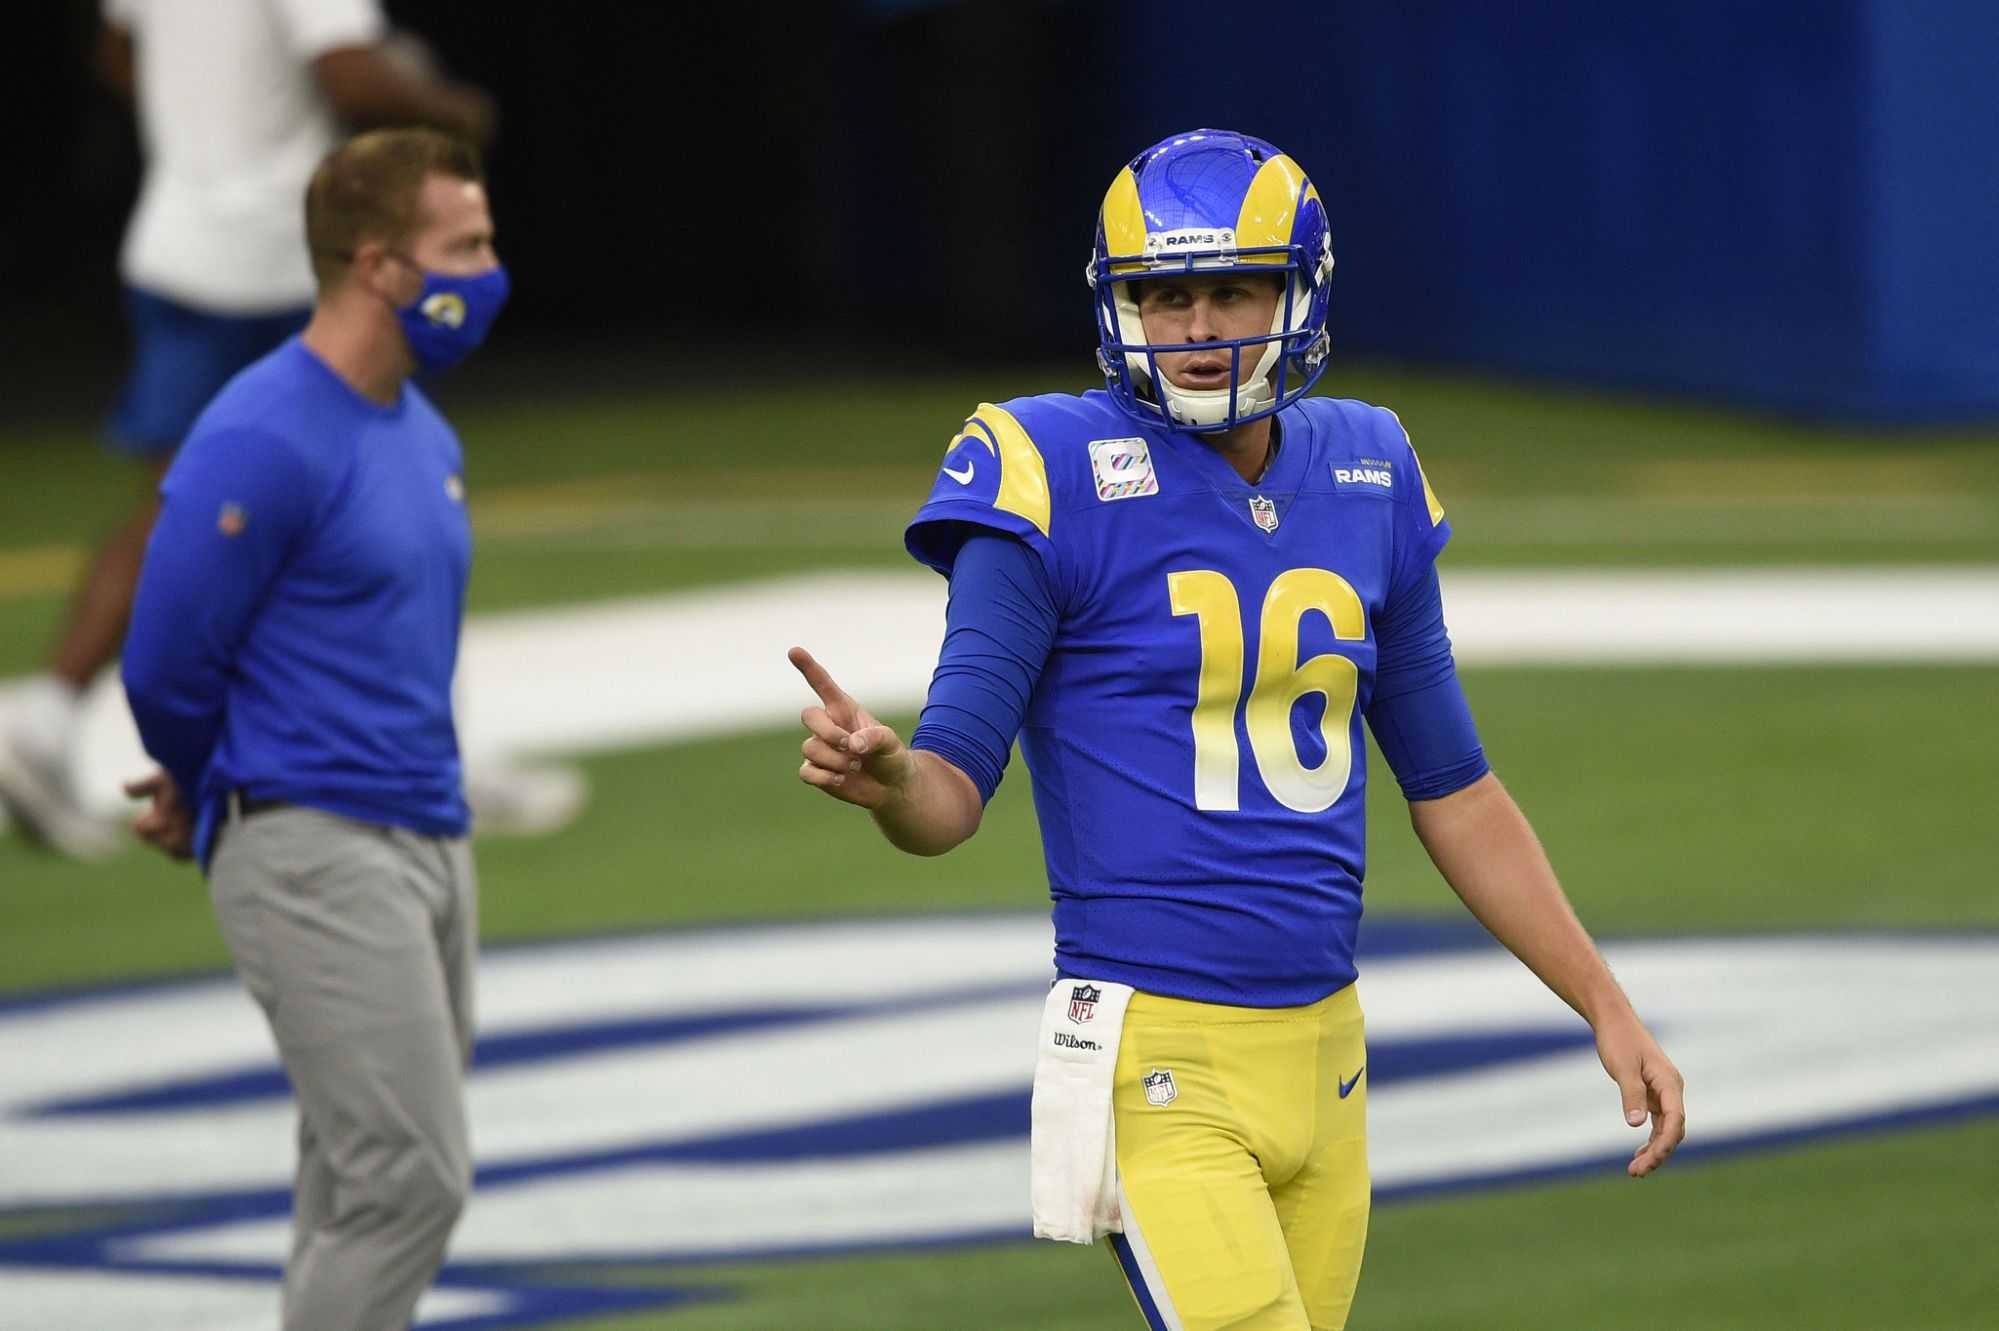  Jared Goff Played His Way Out of L.A., but He Kind of Deserves Our Sympathy